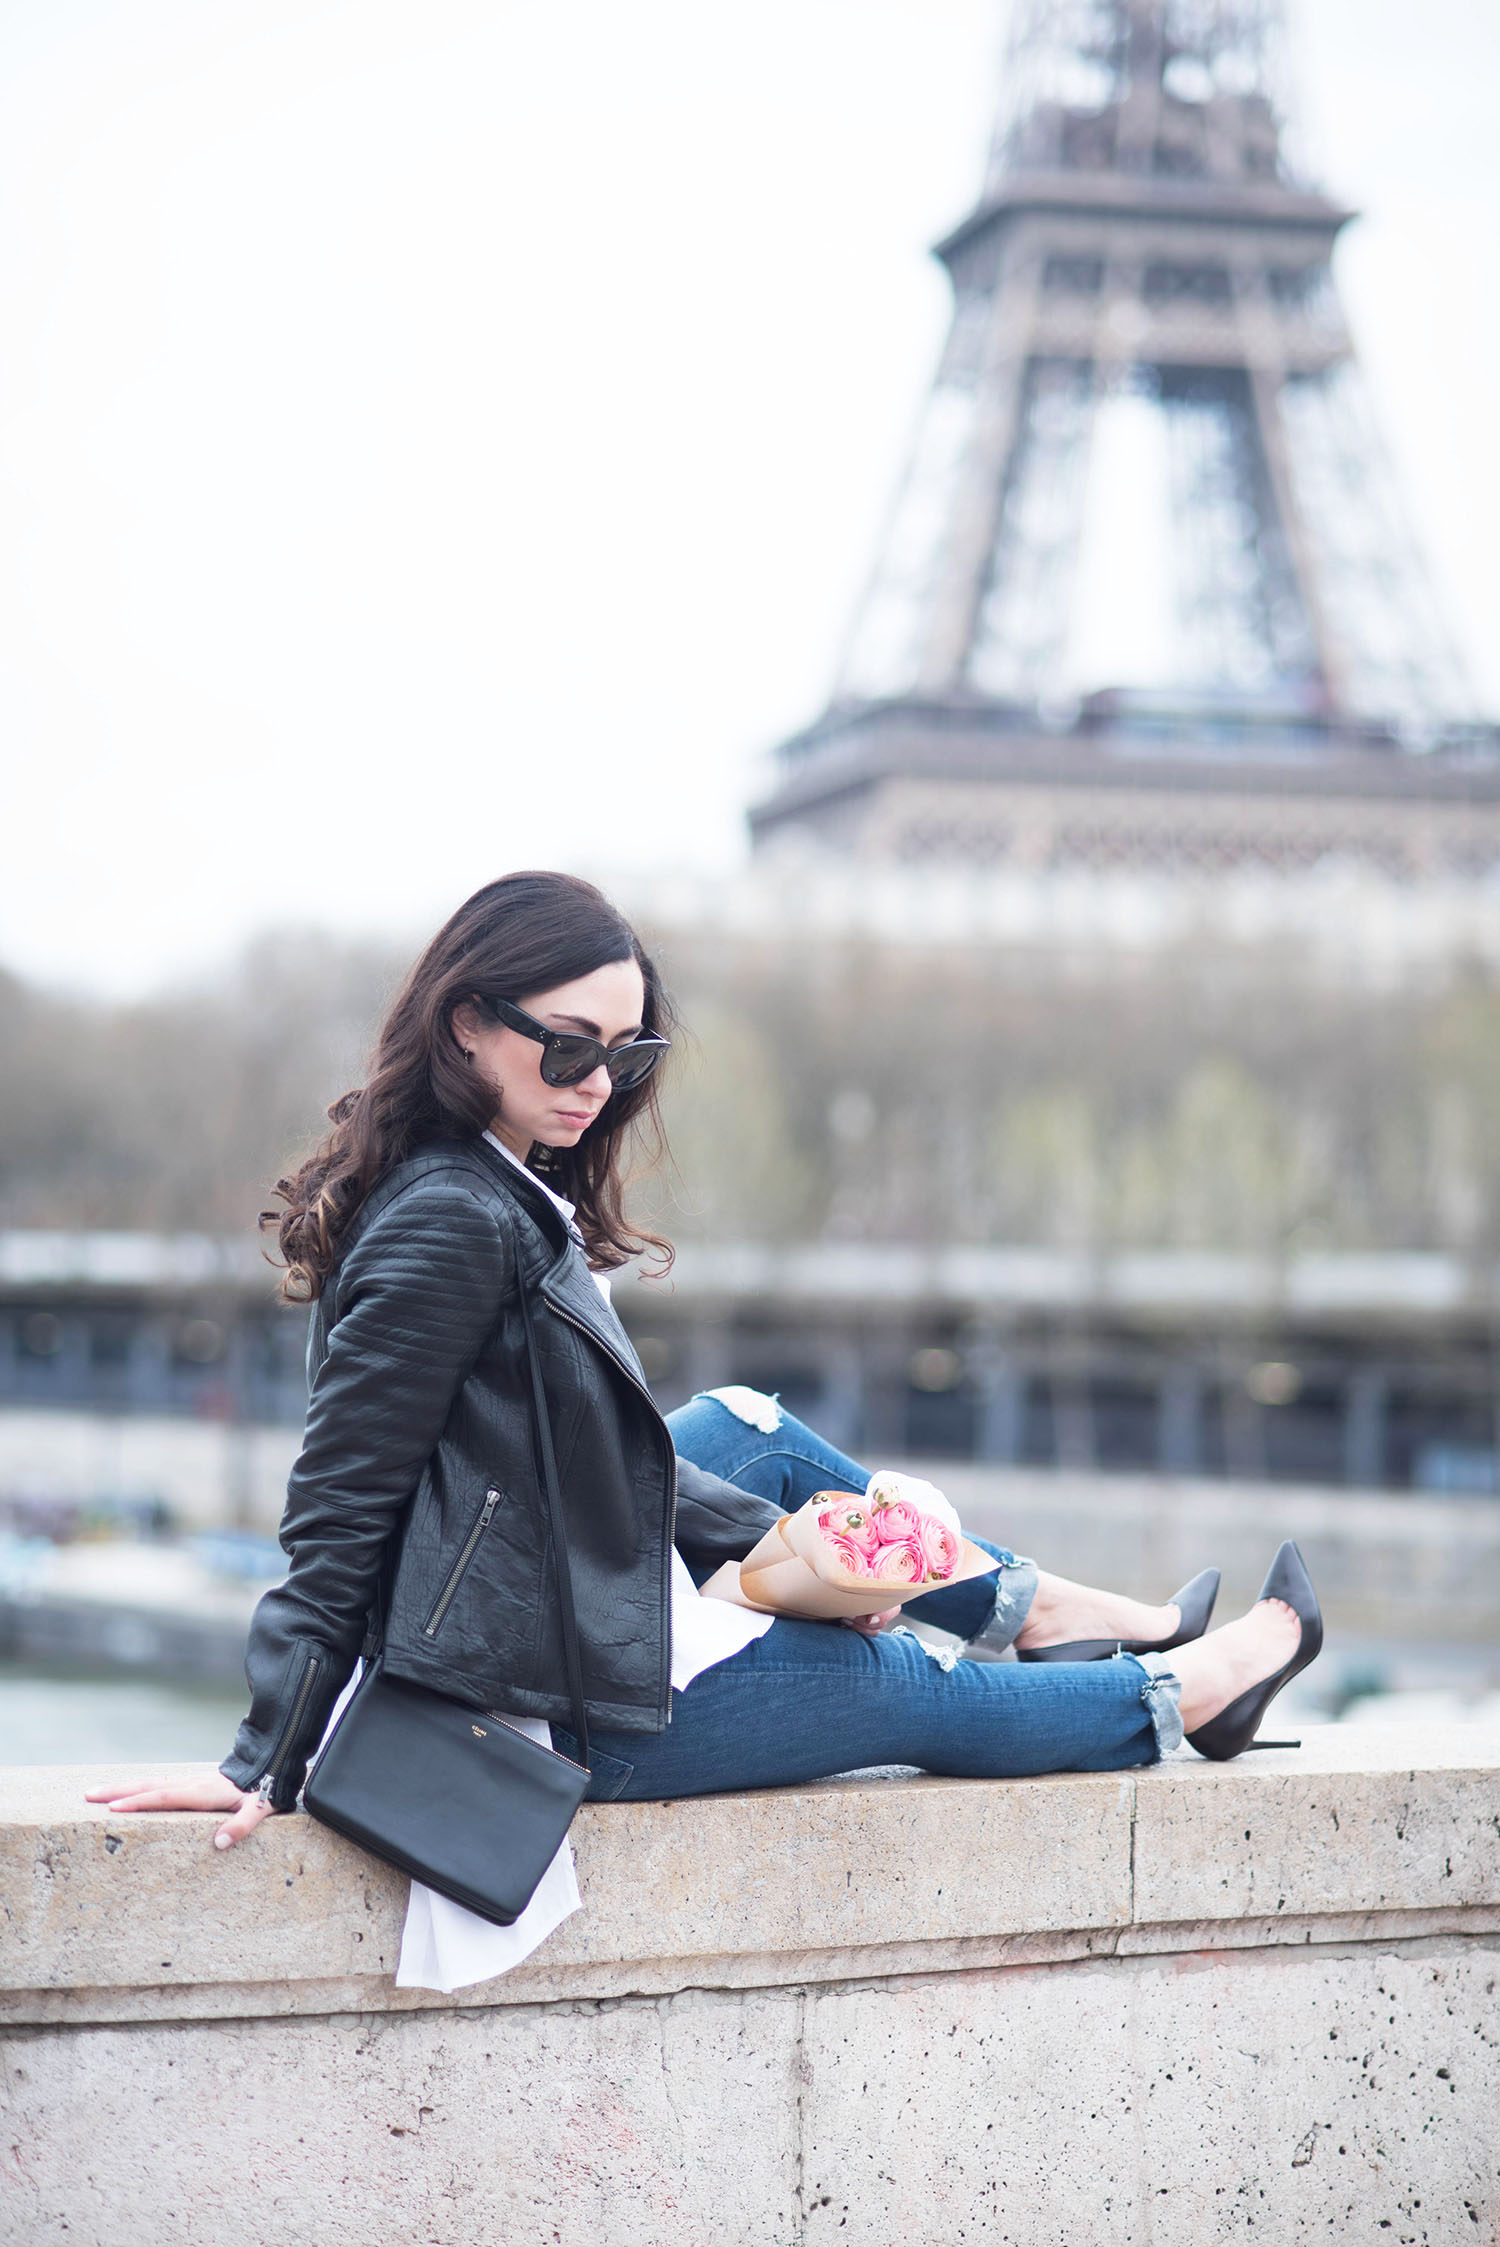 Fashion blogger Cee Fardoe of Coco & Vera sits near the Eiffel Tower in Paris wearing Christian Louboutin Pigalle pumps and Paige Hoxton jeans